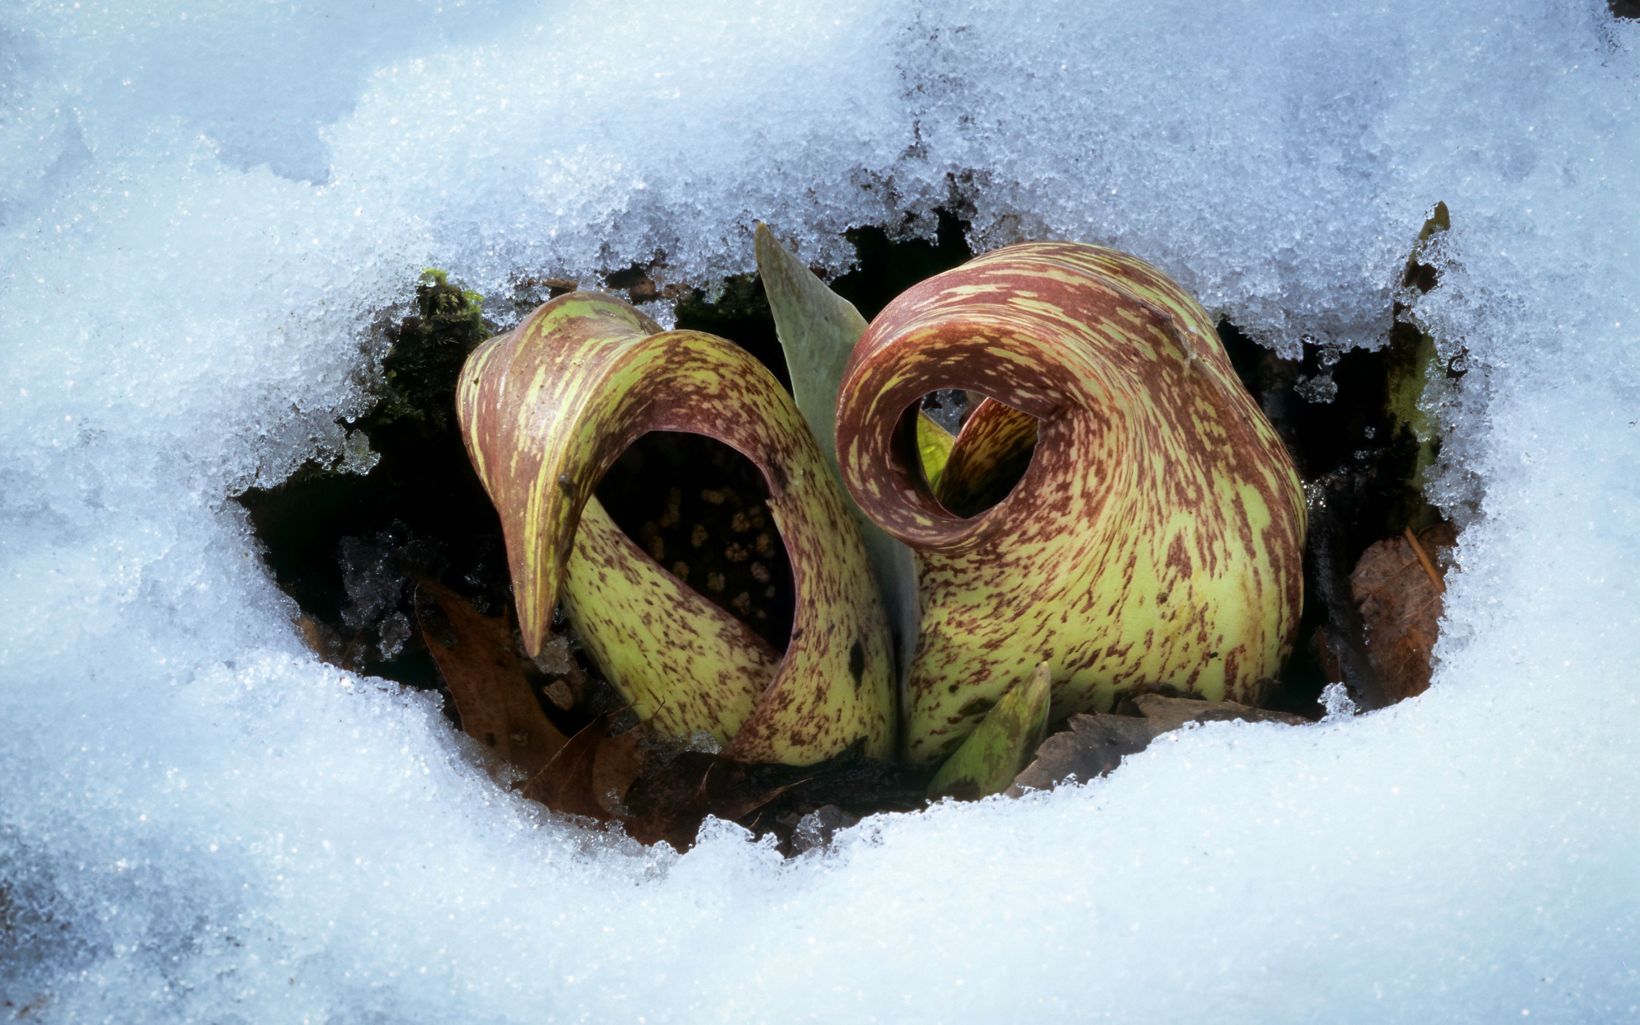 Skunk Cabbage As the first wildflower to bloom in late winter, skunk cabbage melts any snow around it by generating its own heat as it pushes up through the ground. © Gerry Bishop/Shutterstock